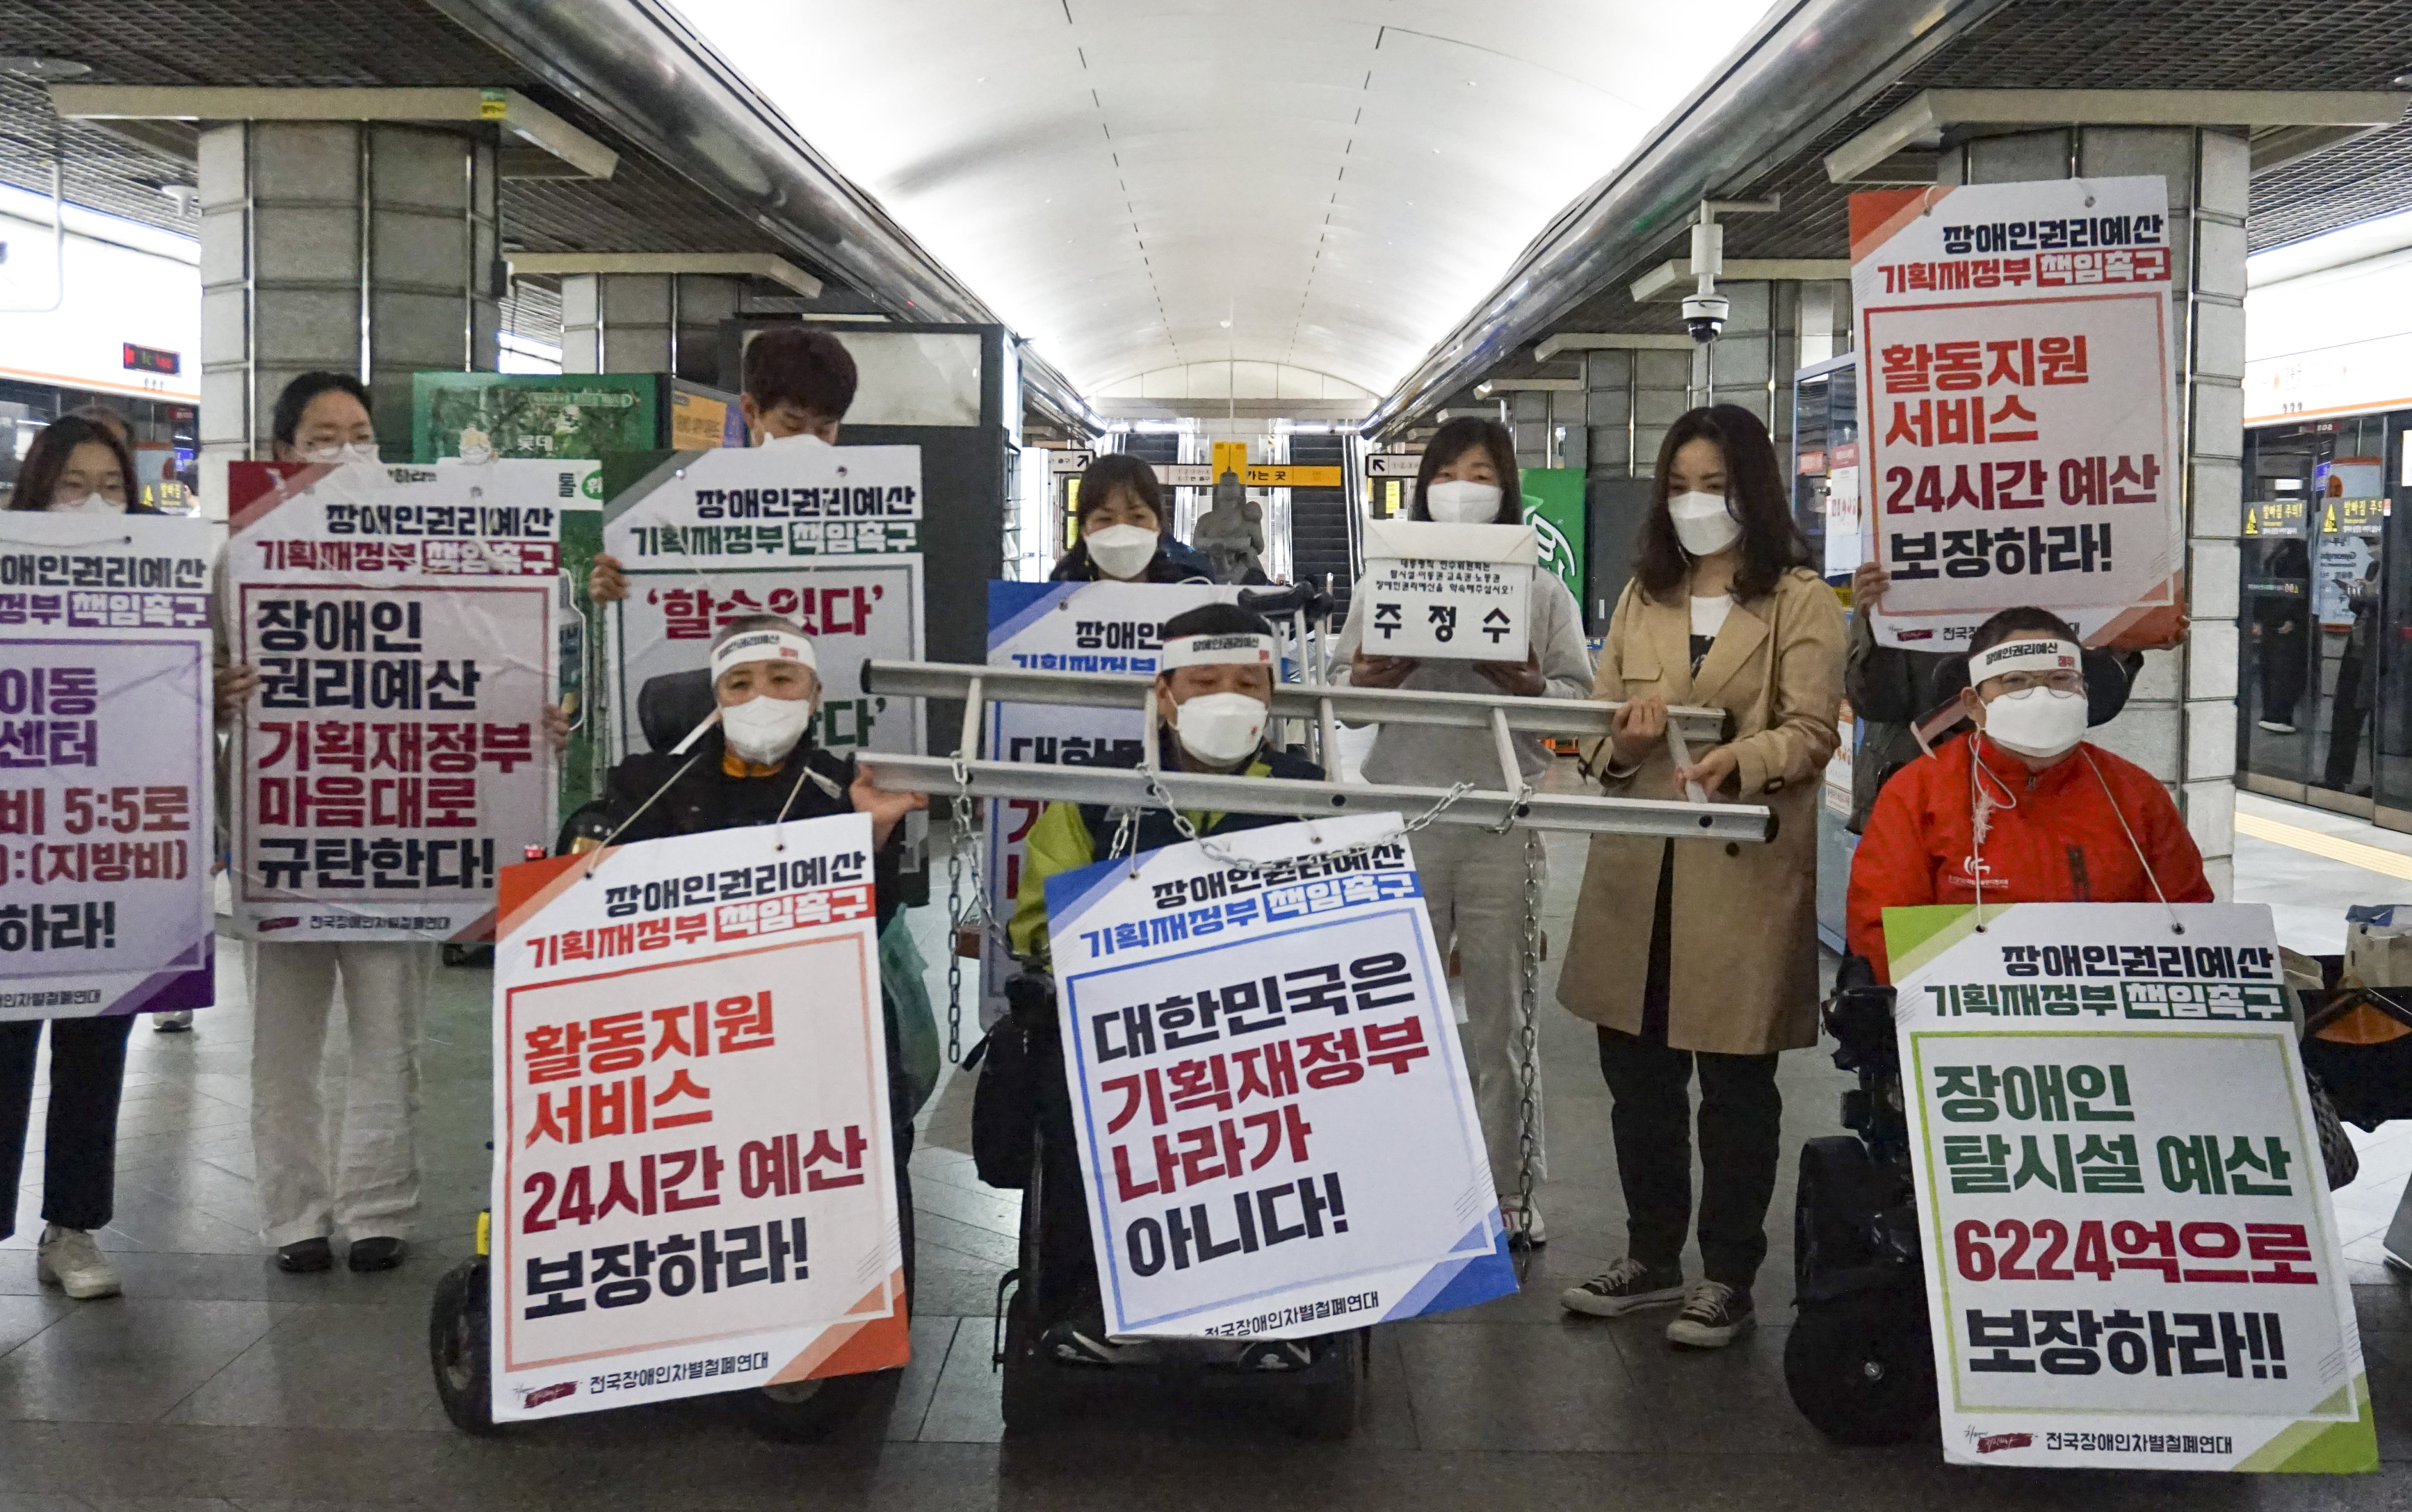 Disabled activists have been protesting in Seoul’s subways since December. Photo: David D. Lee